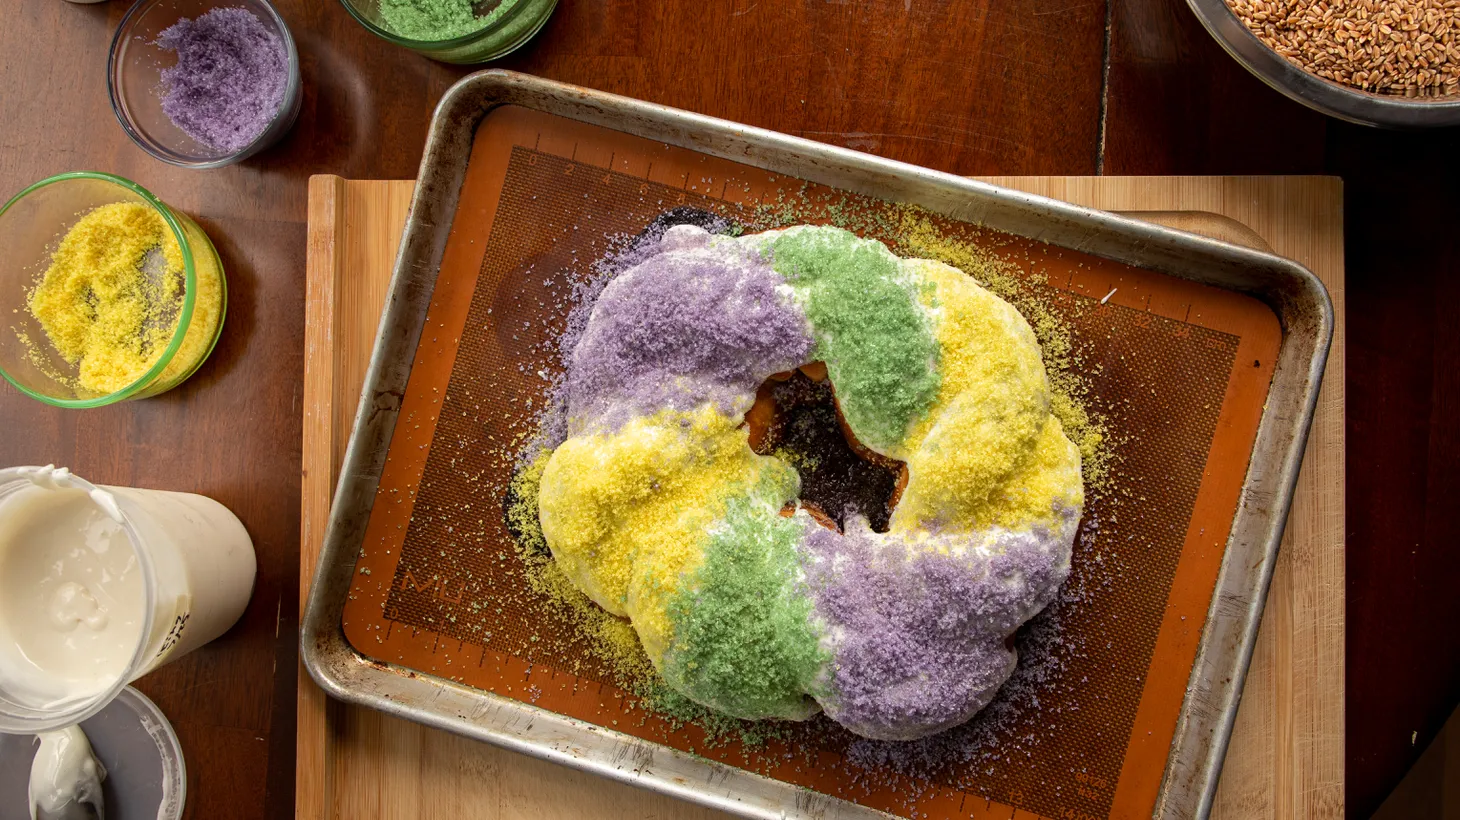 This king cake from Compagnon Bakery in New Orleans is topped with the traditional sugar decoration in the Mardi Gras triad of purple, green and gold.